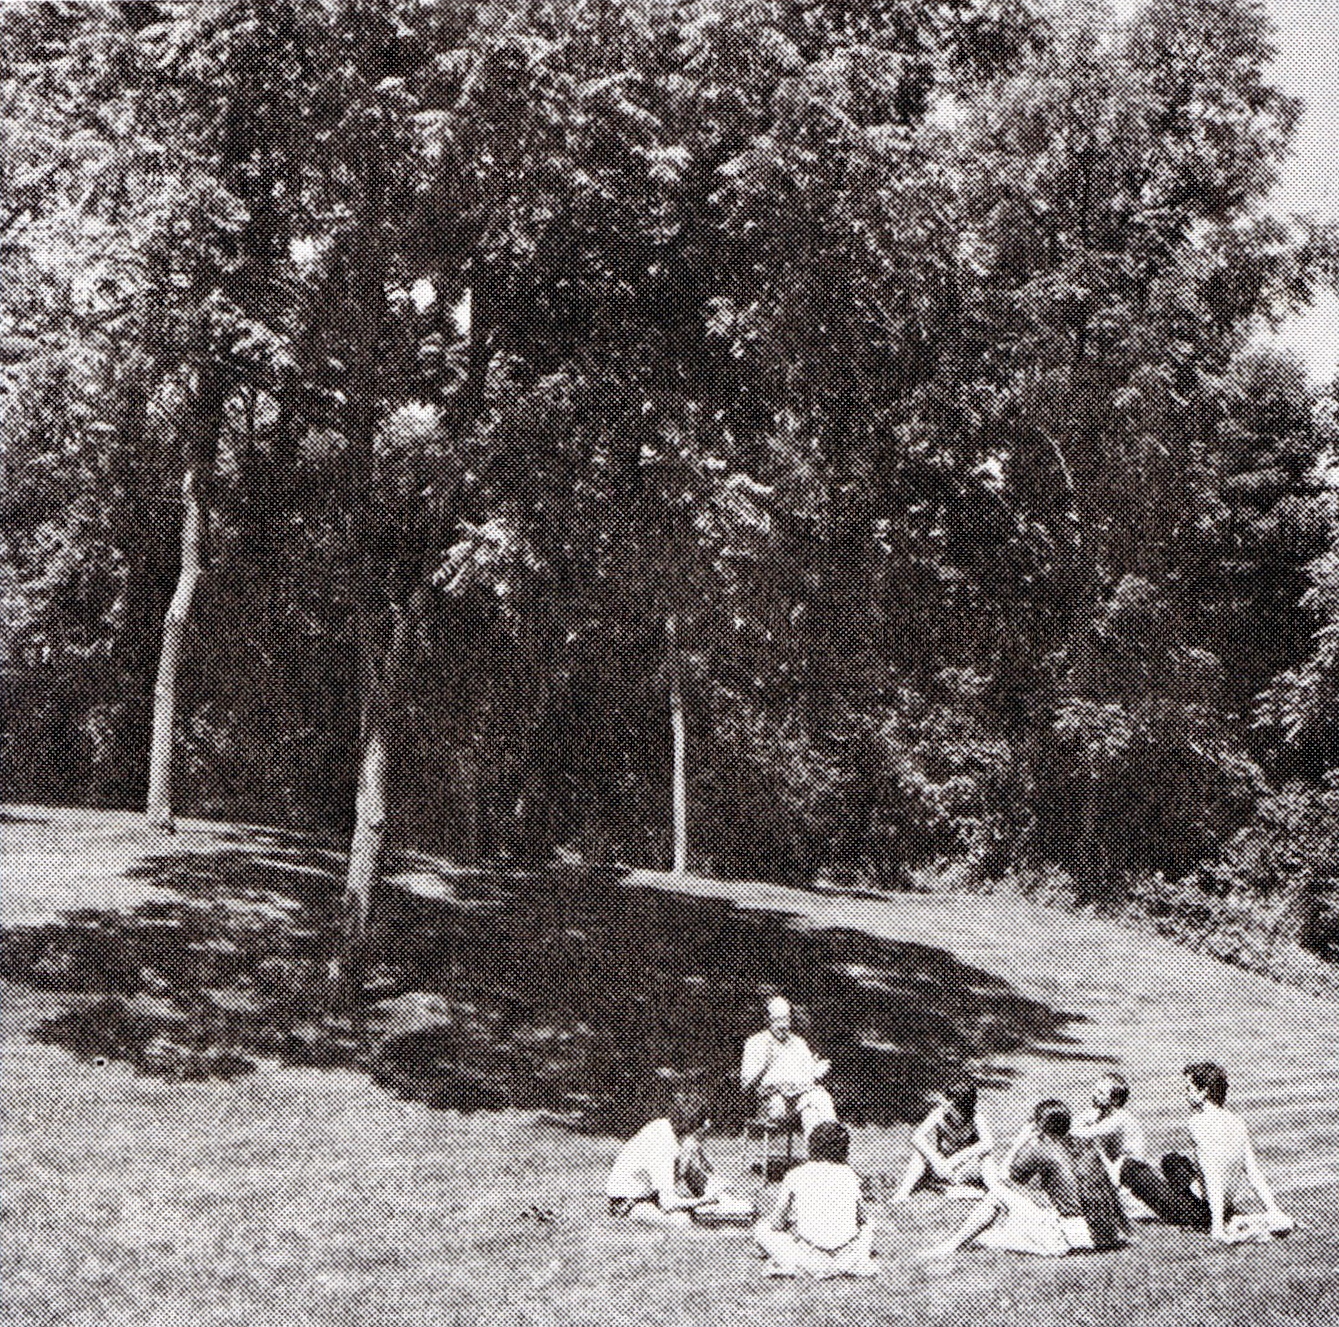 Hunt with members of the Relâche ensemble at Yellow Springs, Chester Springs, Pennsylvania, 1984, 